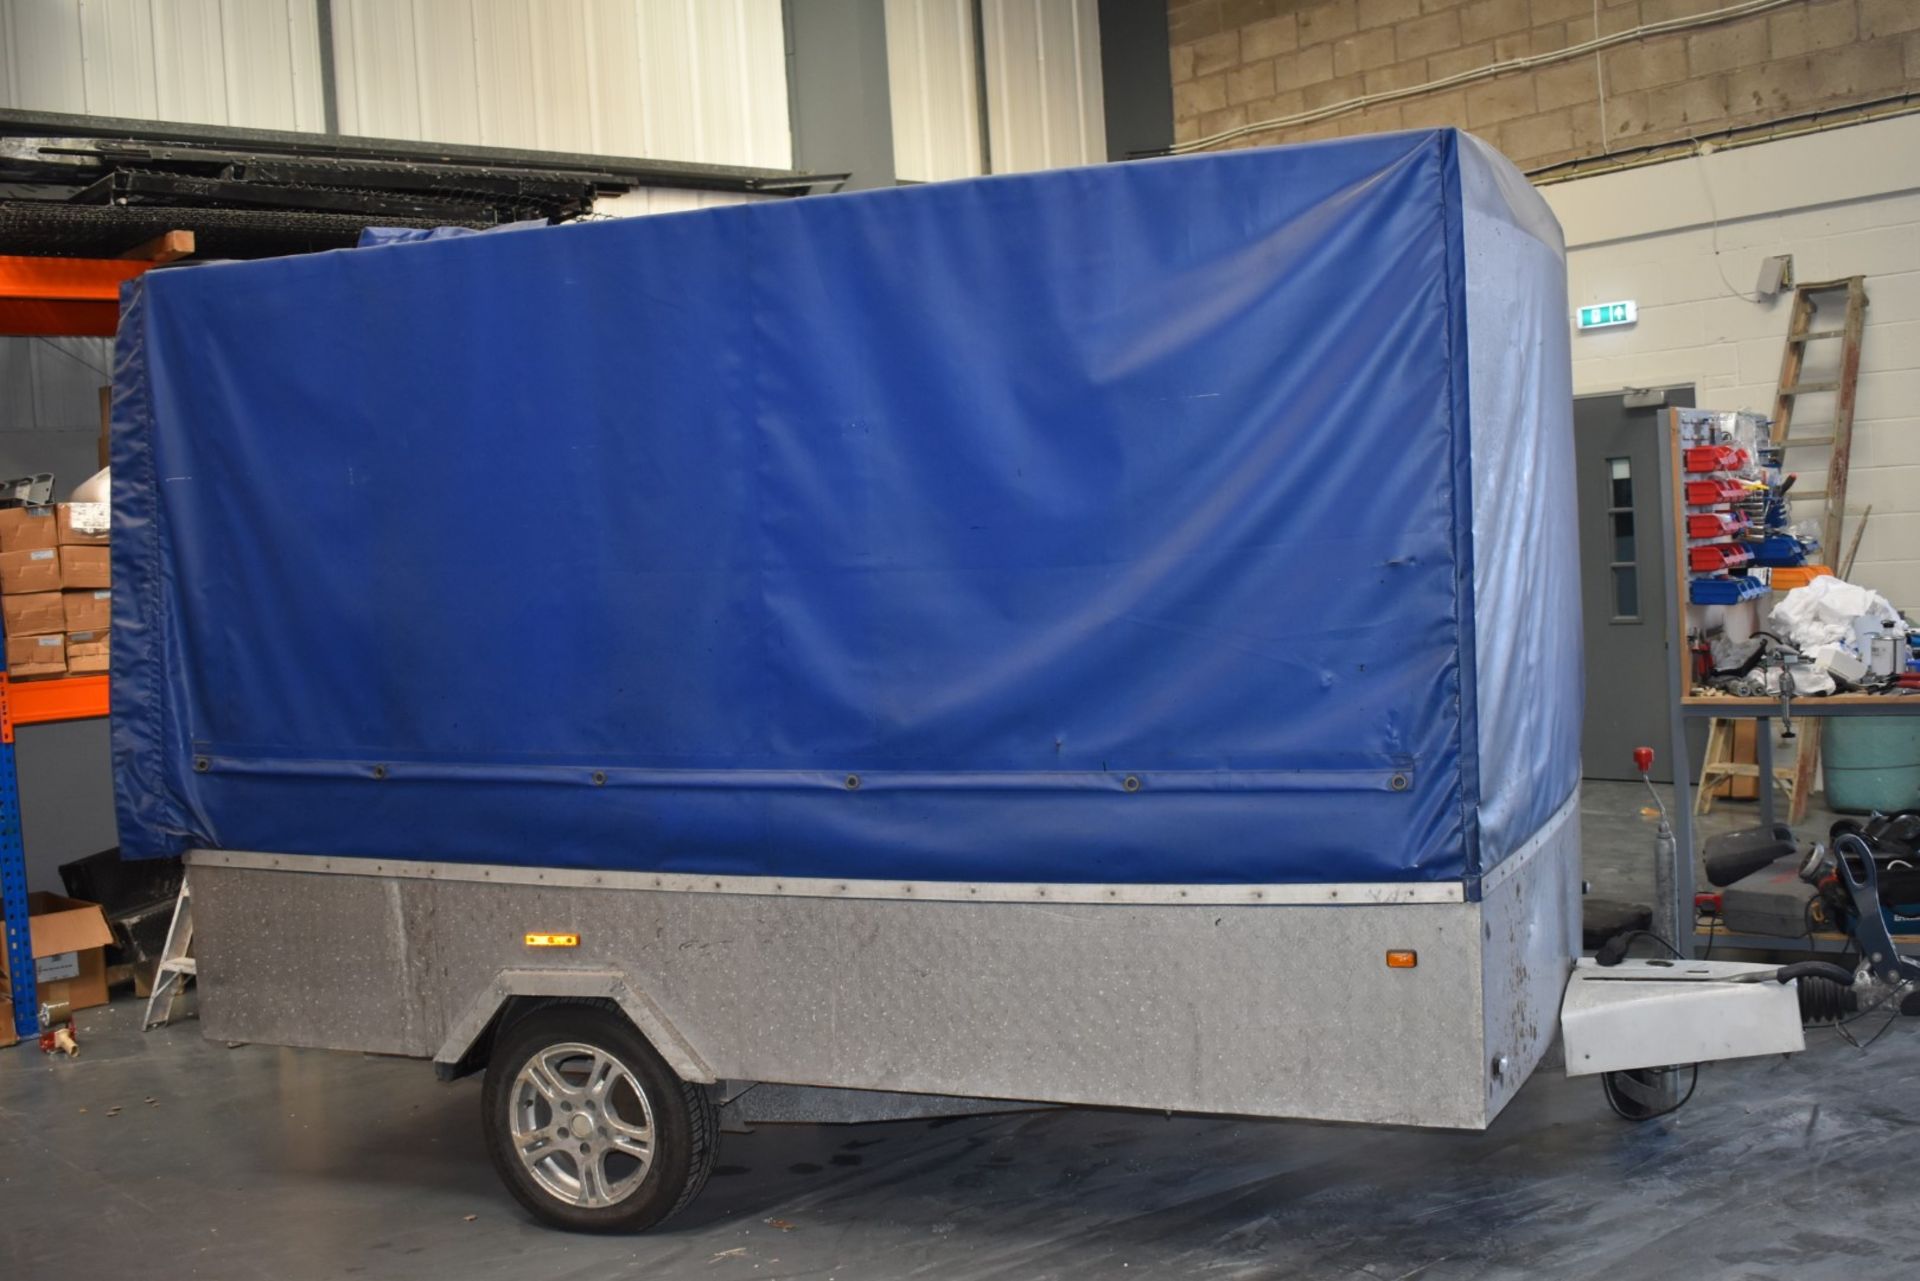 1 x Customised 10x6ft Tow Trailer With Aluminium Frame Enclosure and Heavy Duty Cover, BP WS3000 - Image 3 of 13